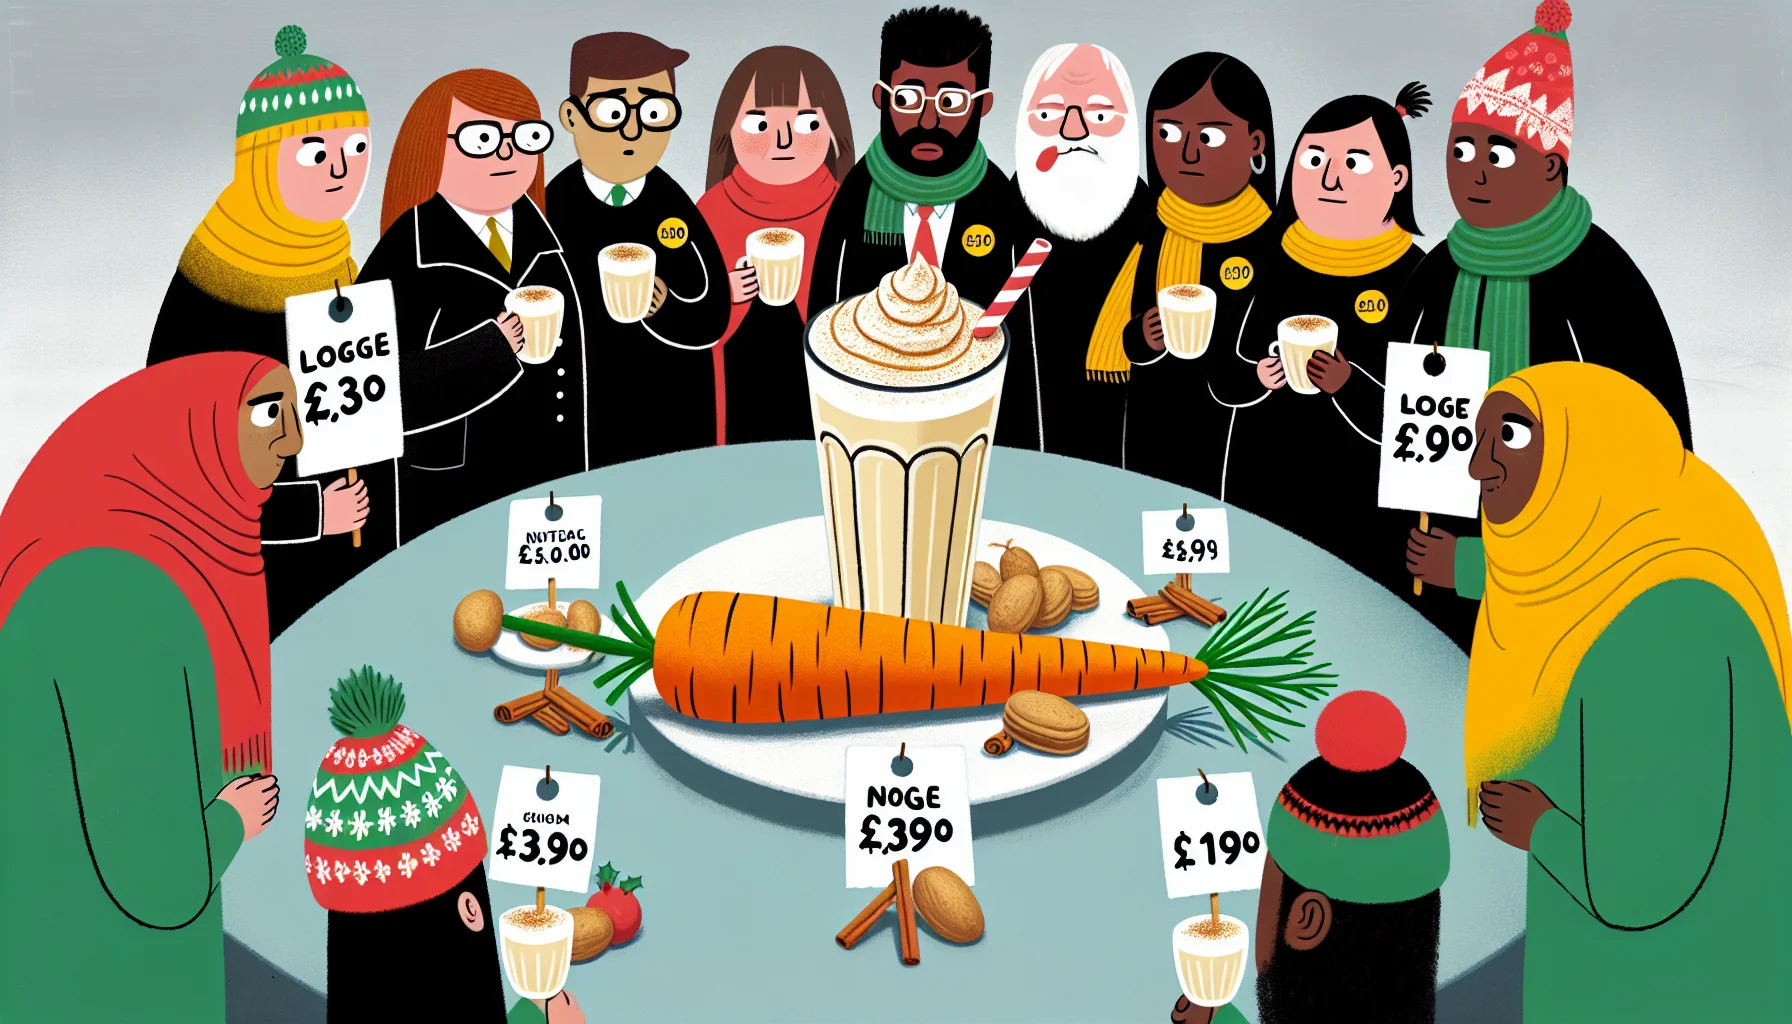 A humorously depicted scene where a group of people are gathered around a table laden with Christmas Eggnog Latte Treats. These treats, looking delectable with their creamy colour and the inviting aroma of nutmeg and cinnamon, are accompanied by playful price tags that show surprisingly low costs. To showcase the theme of healthy eating, an amusingly large carrot is shown as the centerpiece, draped with festive holiday decorations. Each person, of diverse descent including Caucasian, Hispanic, Black, Middle-Eastern and South Asian, and of mixed genders, appears intrigued and delighted by this unusual, yet healthy option amidst the decadent holiday treats.